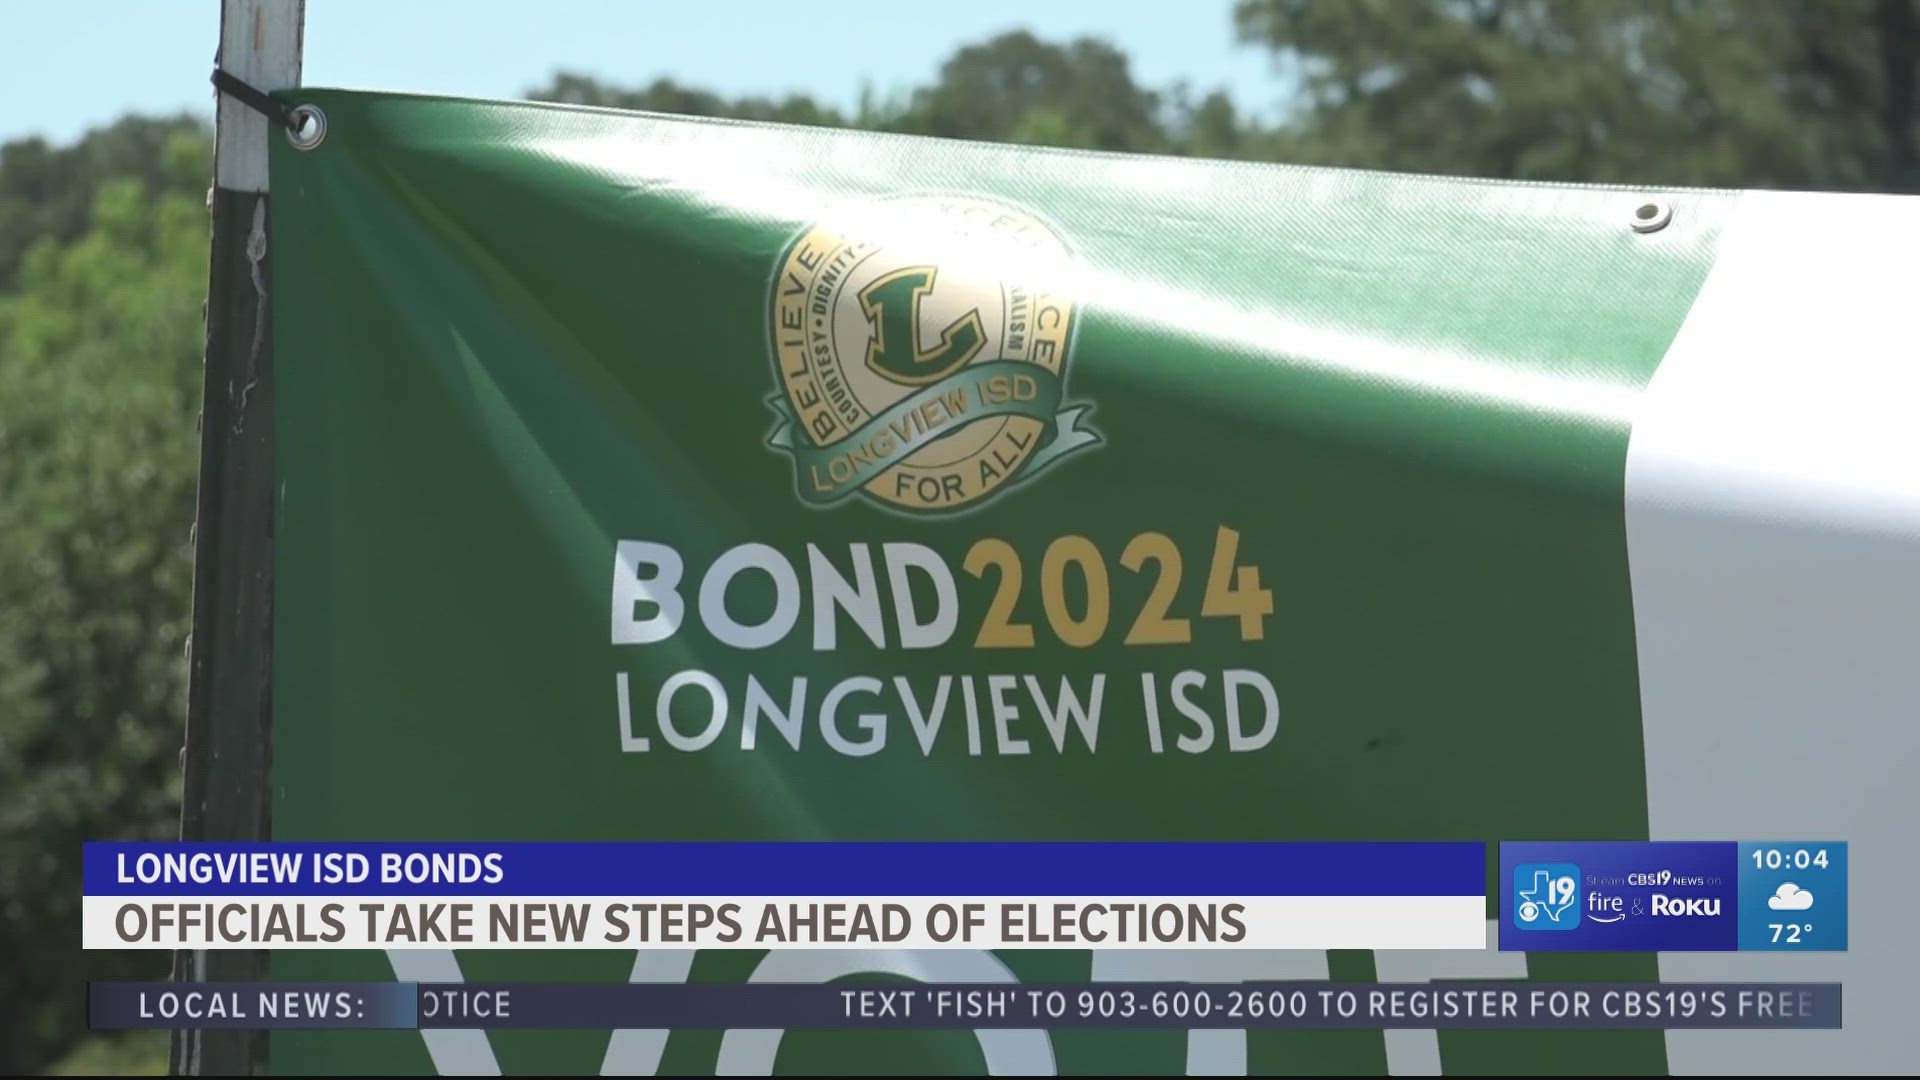 Early voting has started here in East Texas, and Longview ISD has given voters 456 million things to think about.